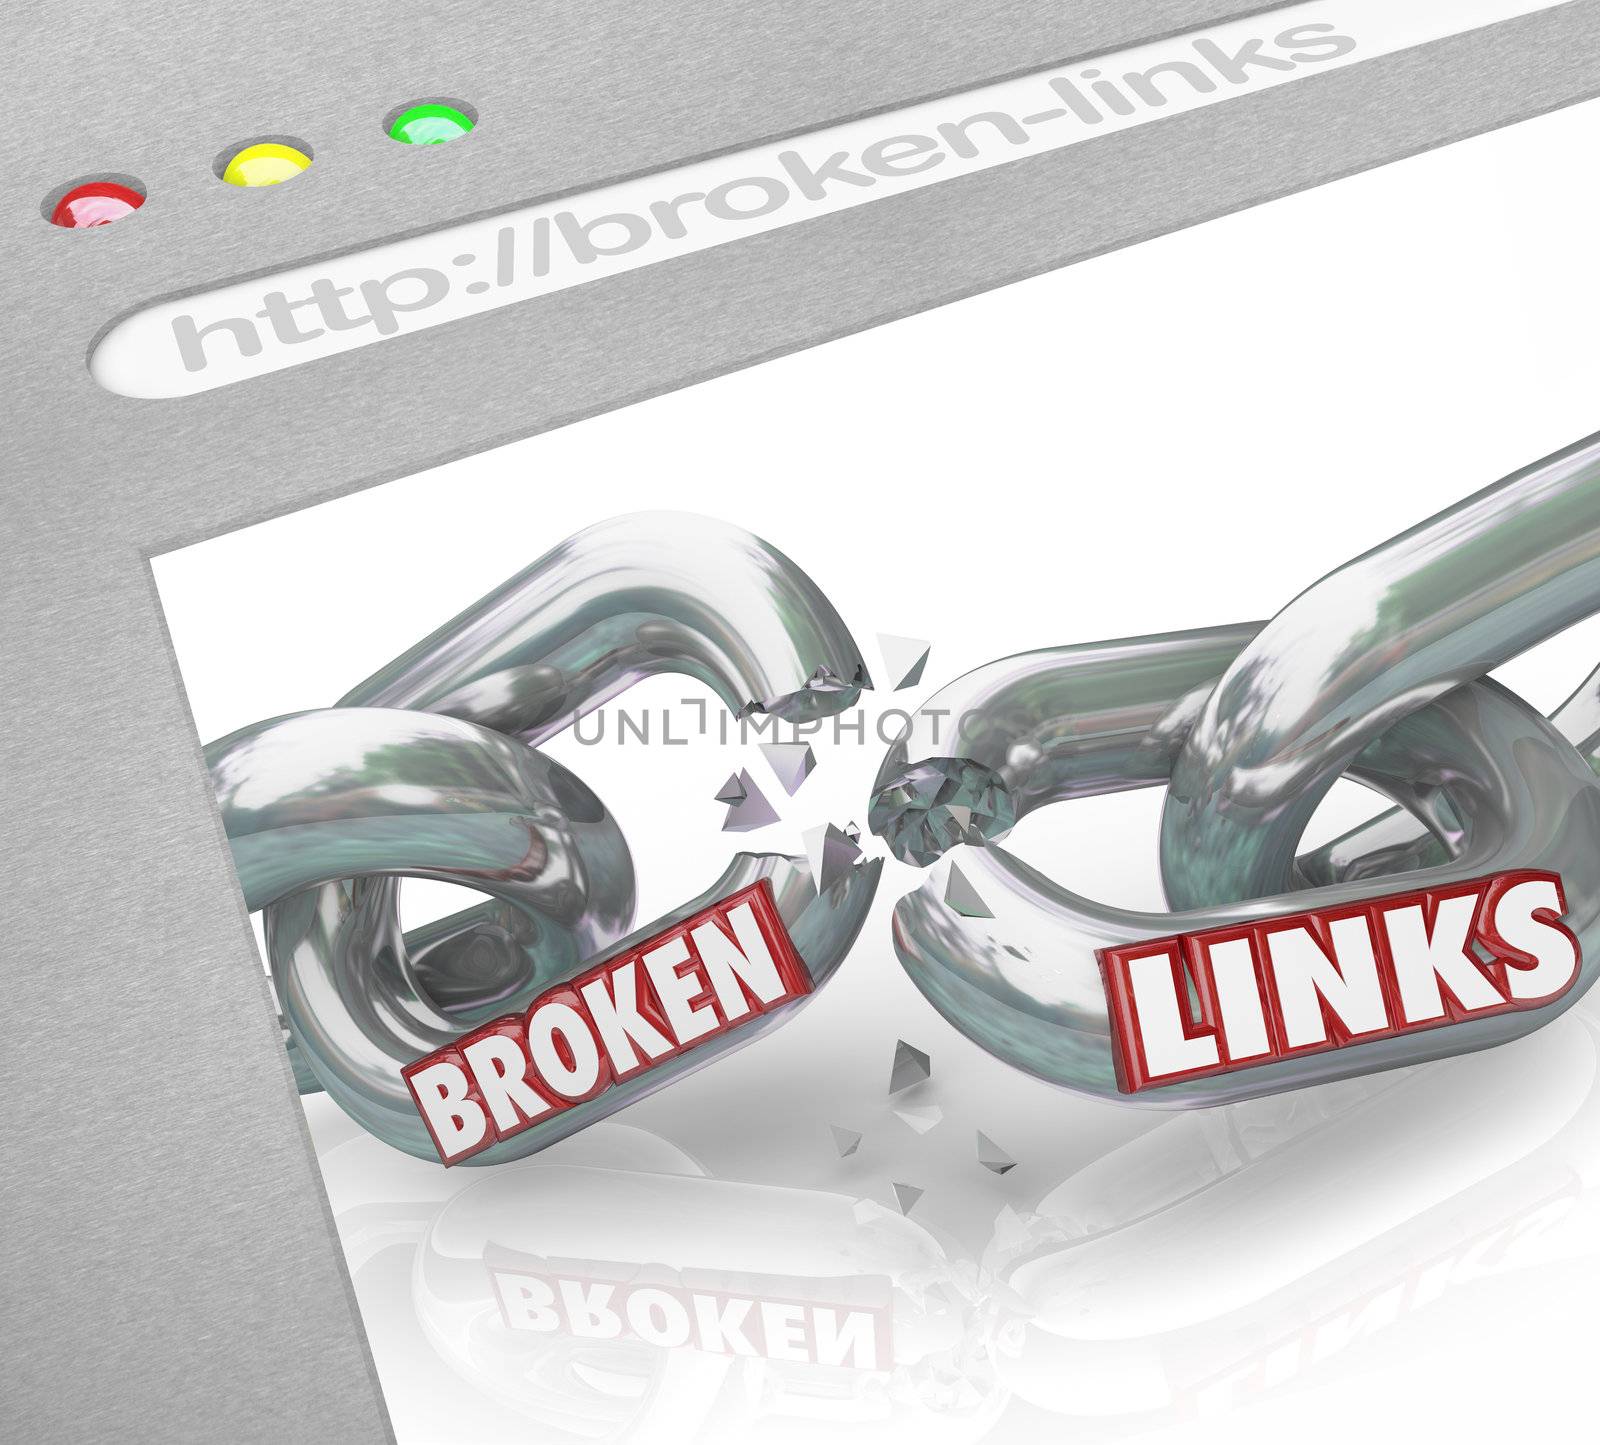 A web browser window shows connected chain links broken to represent broken hyperlinks and hotlinks